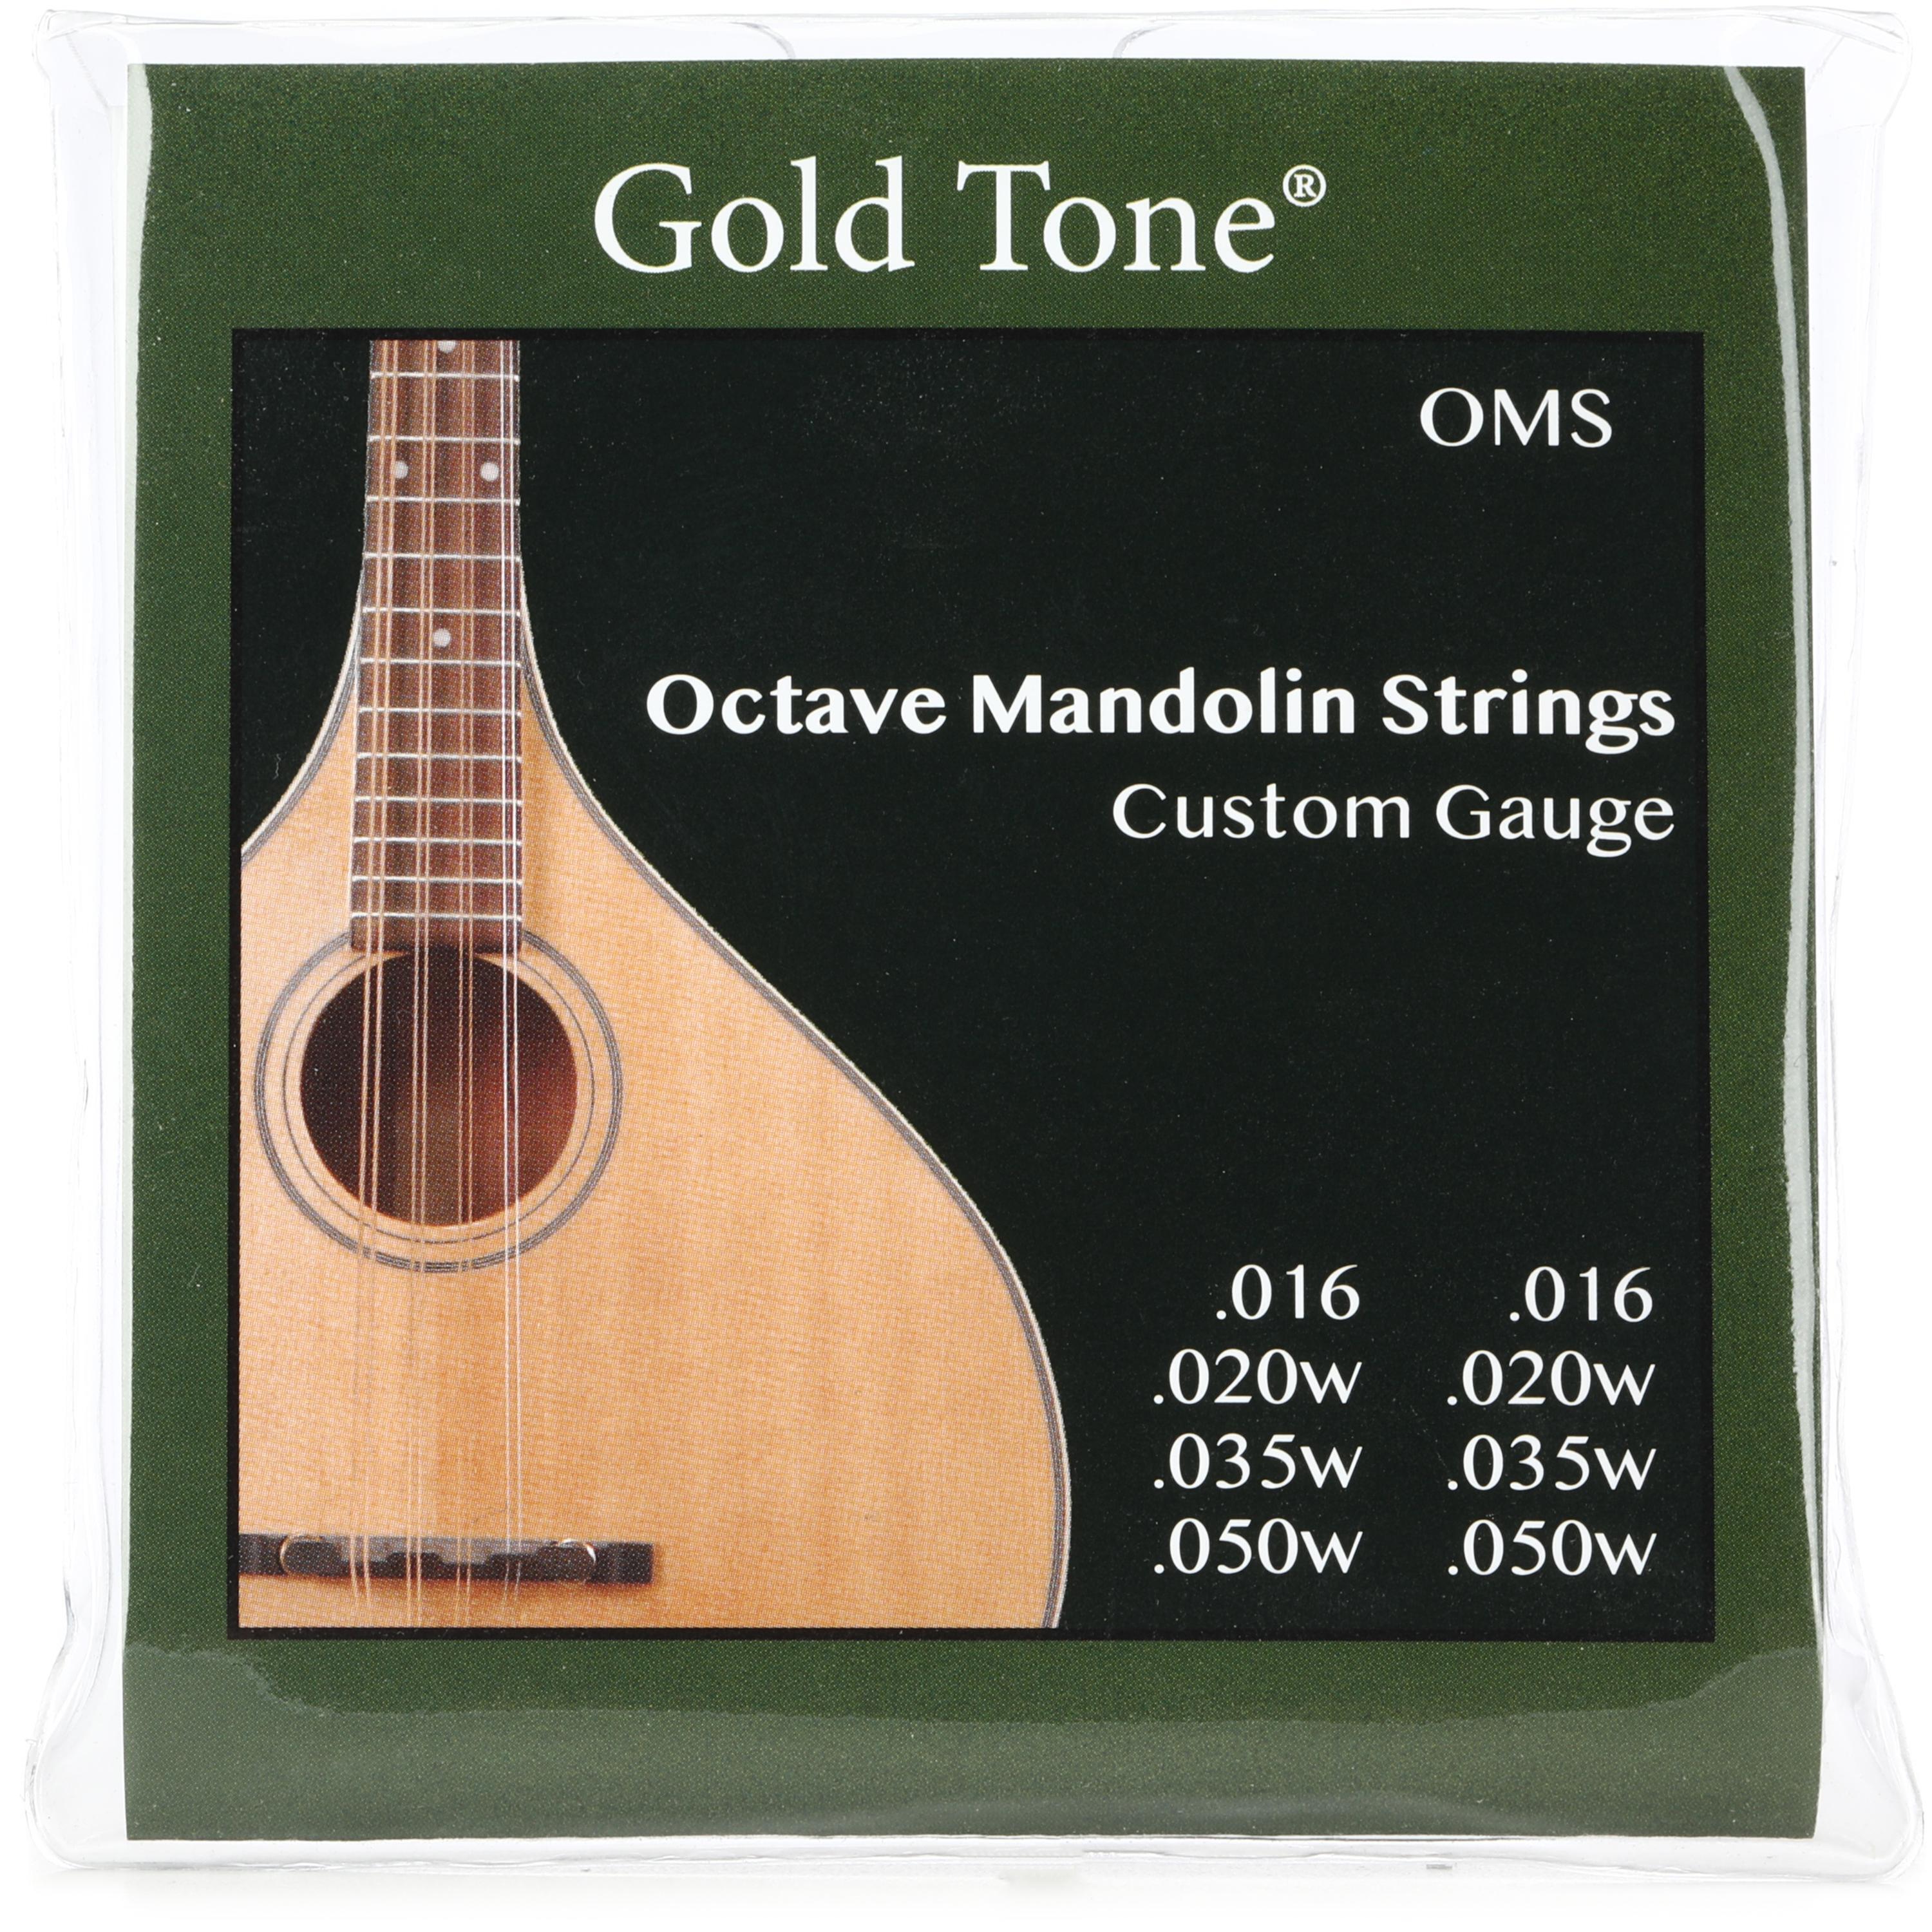 Gold Tone OMS Bronze Wound Octave Mandolin Strings, Full Set